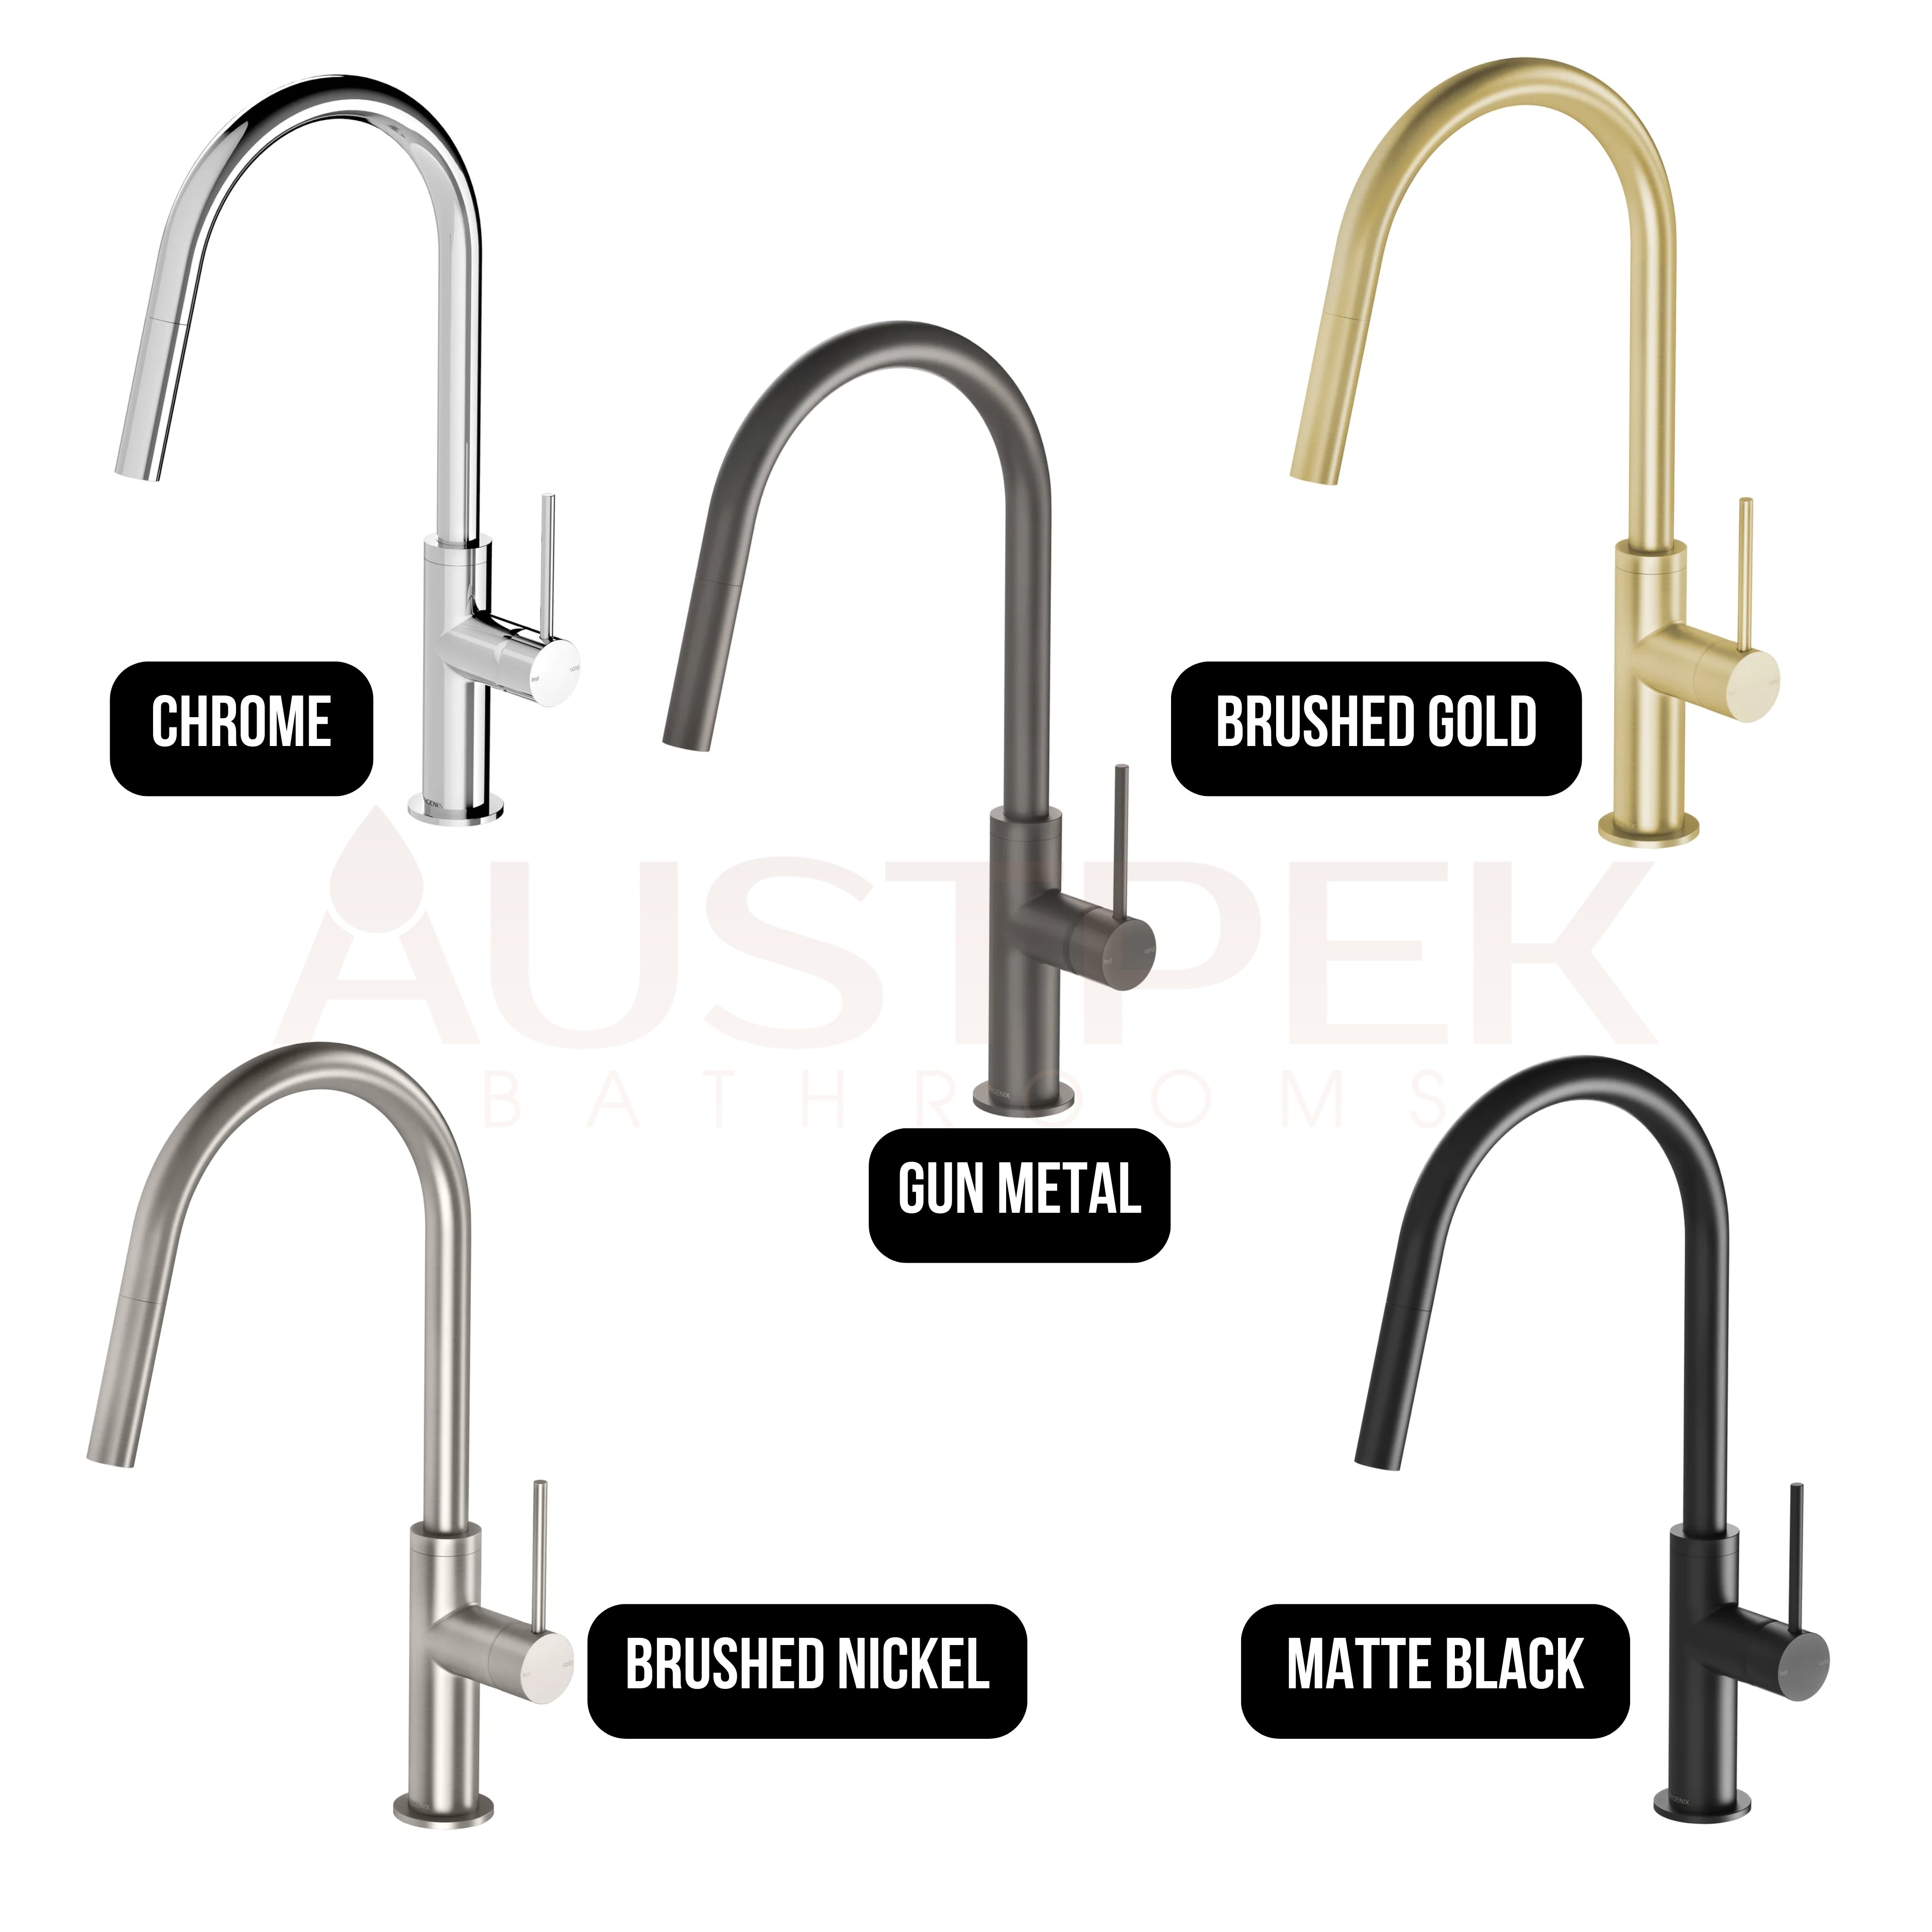 PHOENIX VIVID SLIMLINE PULL OUT SINK MIXER BRUSHED GOLD